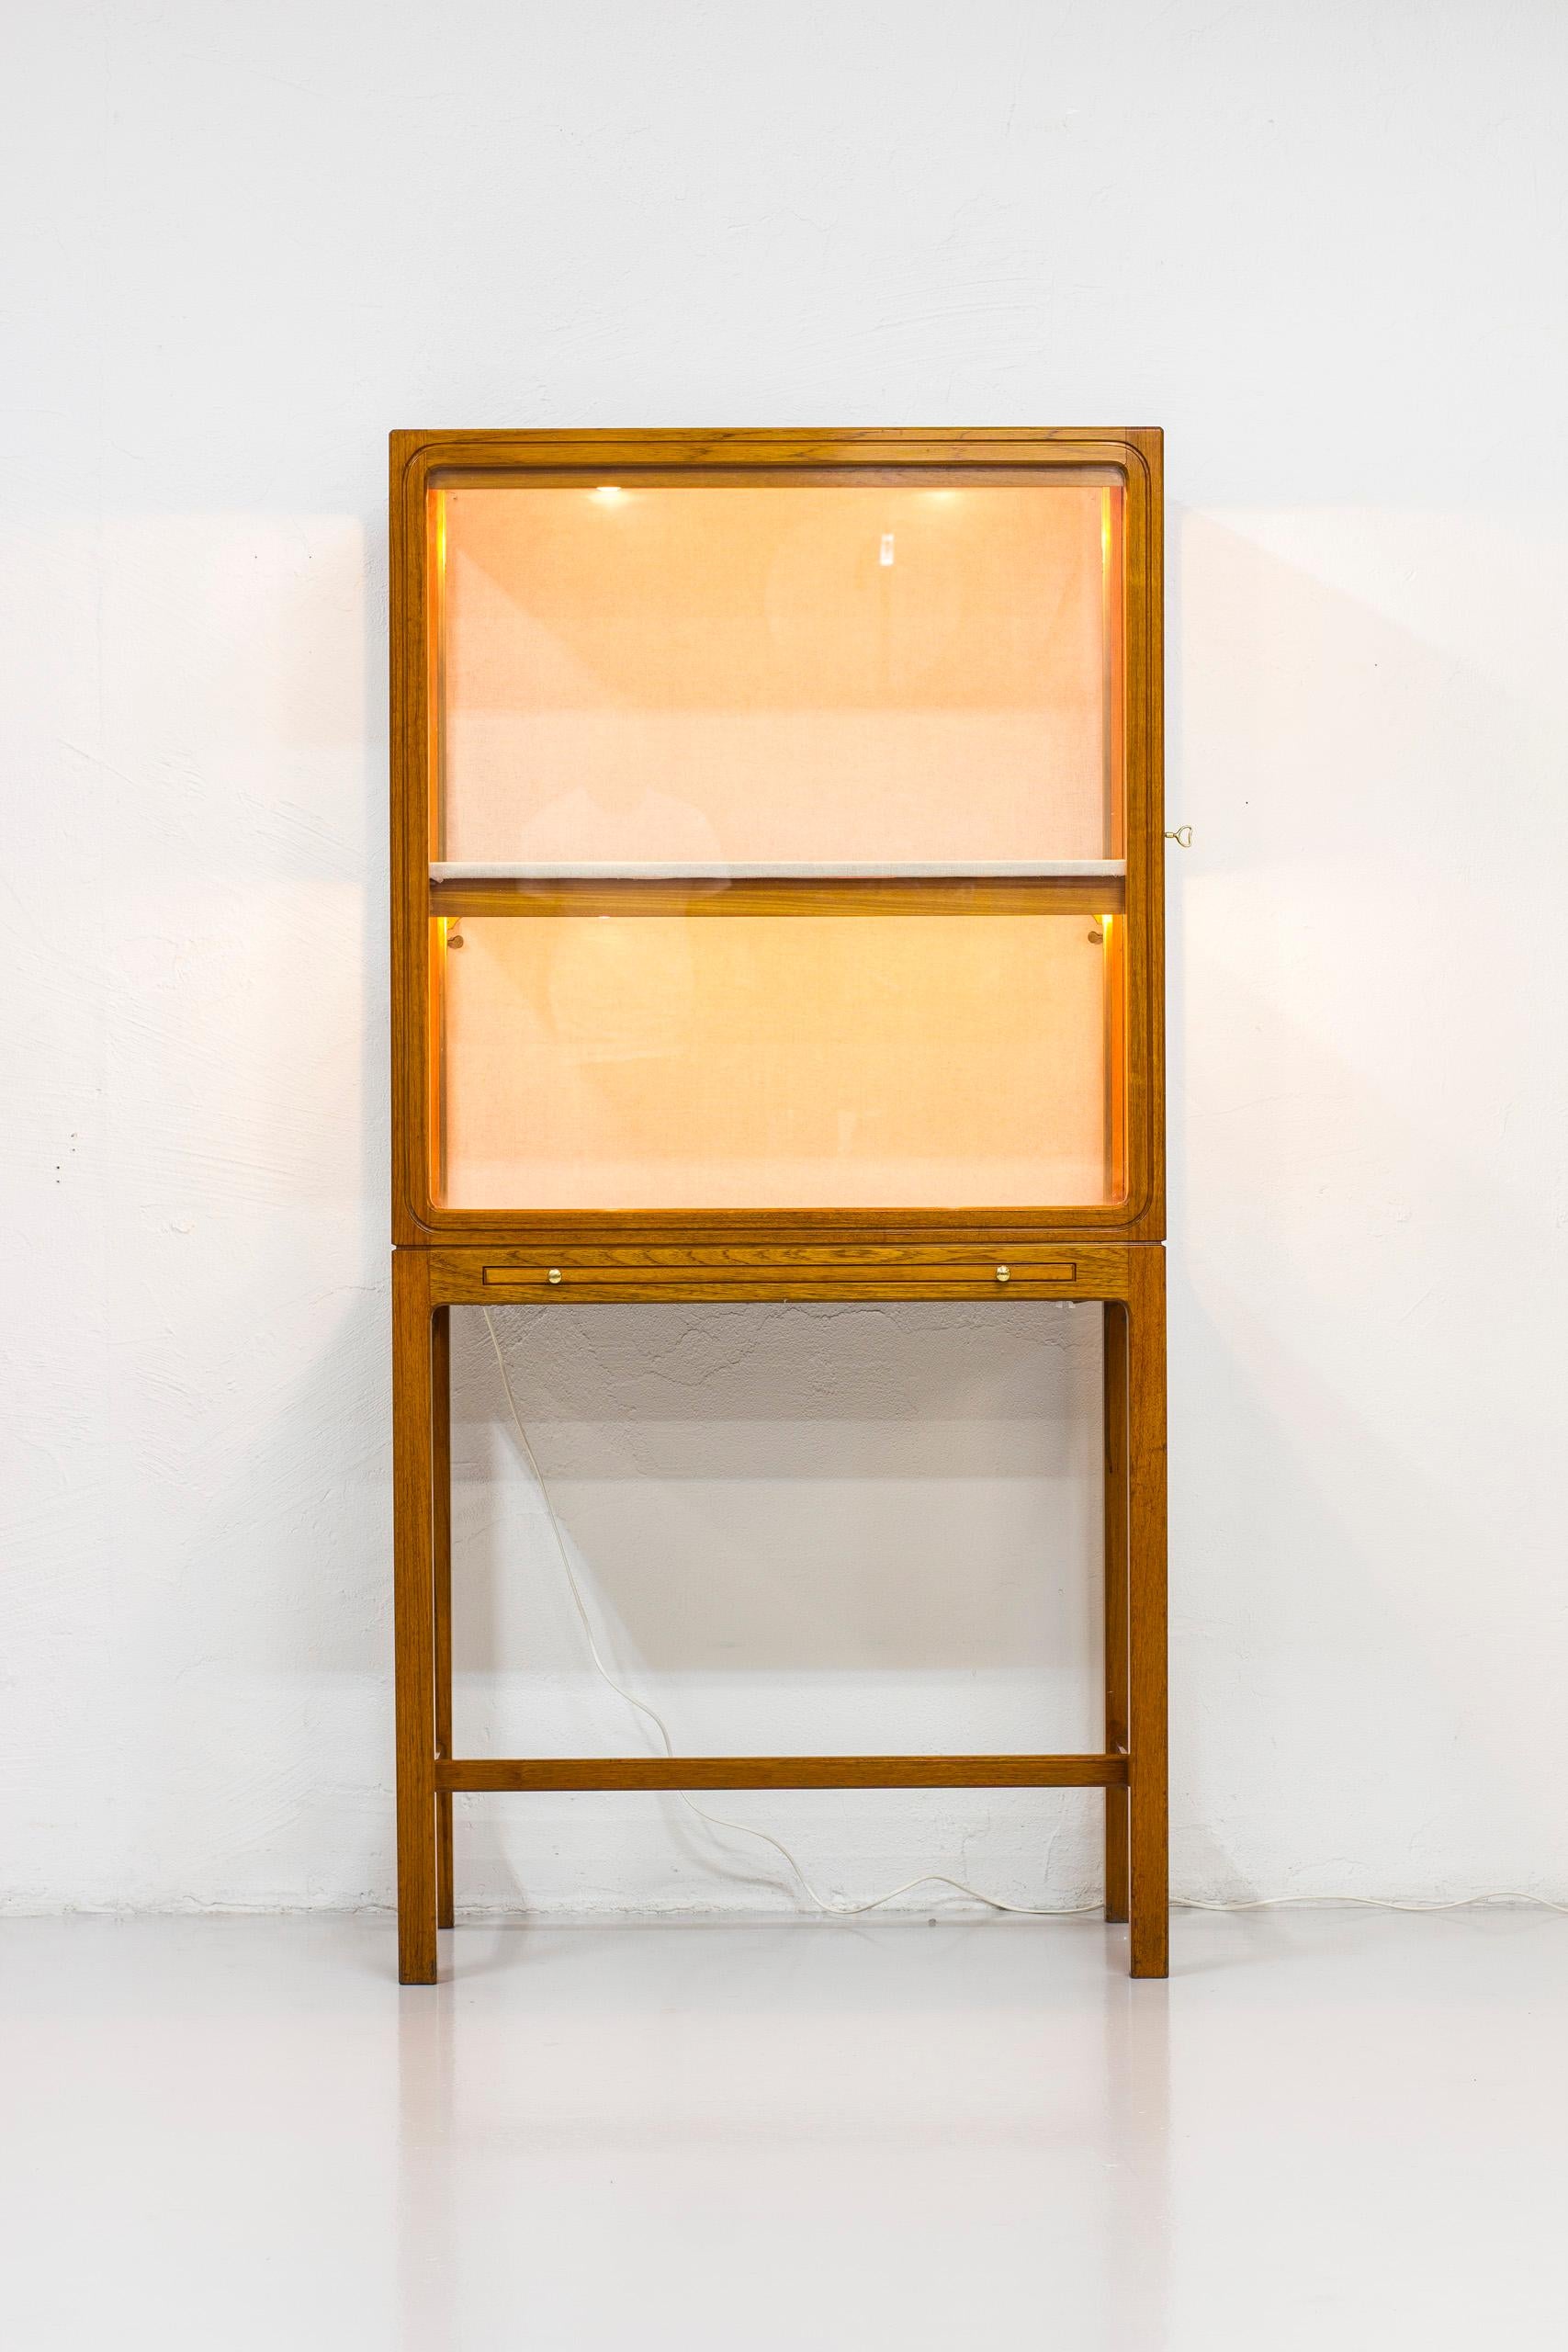 Display cabinet produced by Nordiska Kompaniet in Sweden. Likely designed by Carl-Axel Acking. Produced between the 1940-1950s. Made in solid mahogany, brass and glass. With linen upholstery in natural color on the inside. Built in display light.